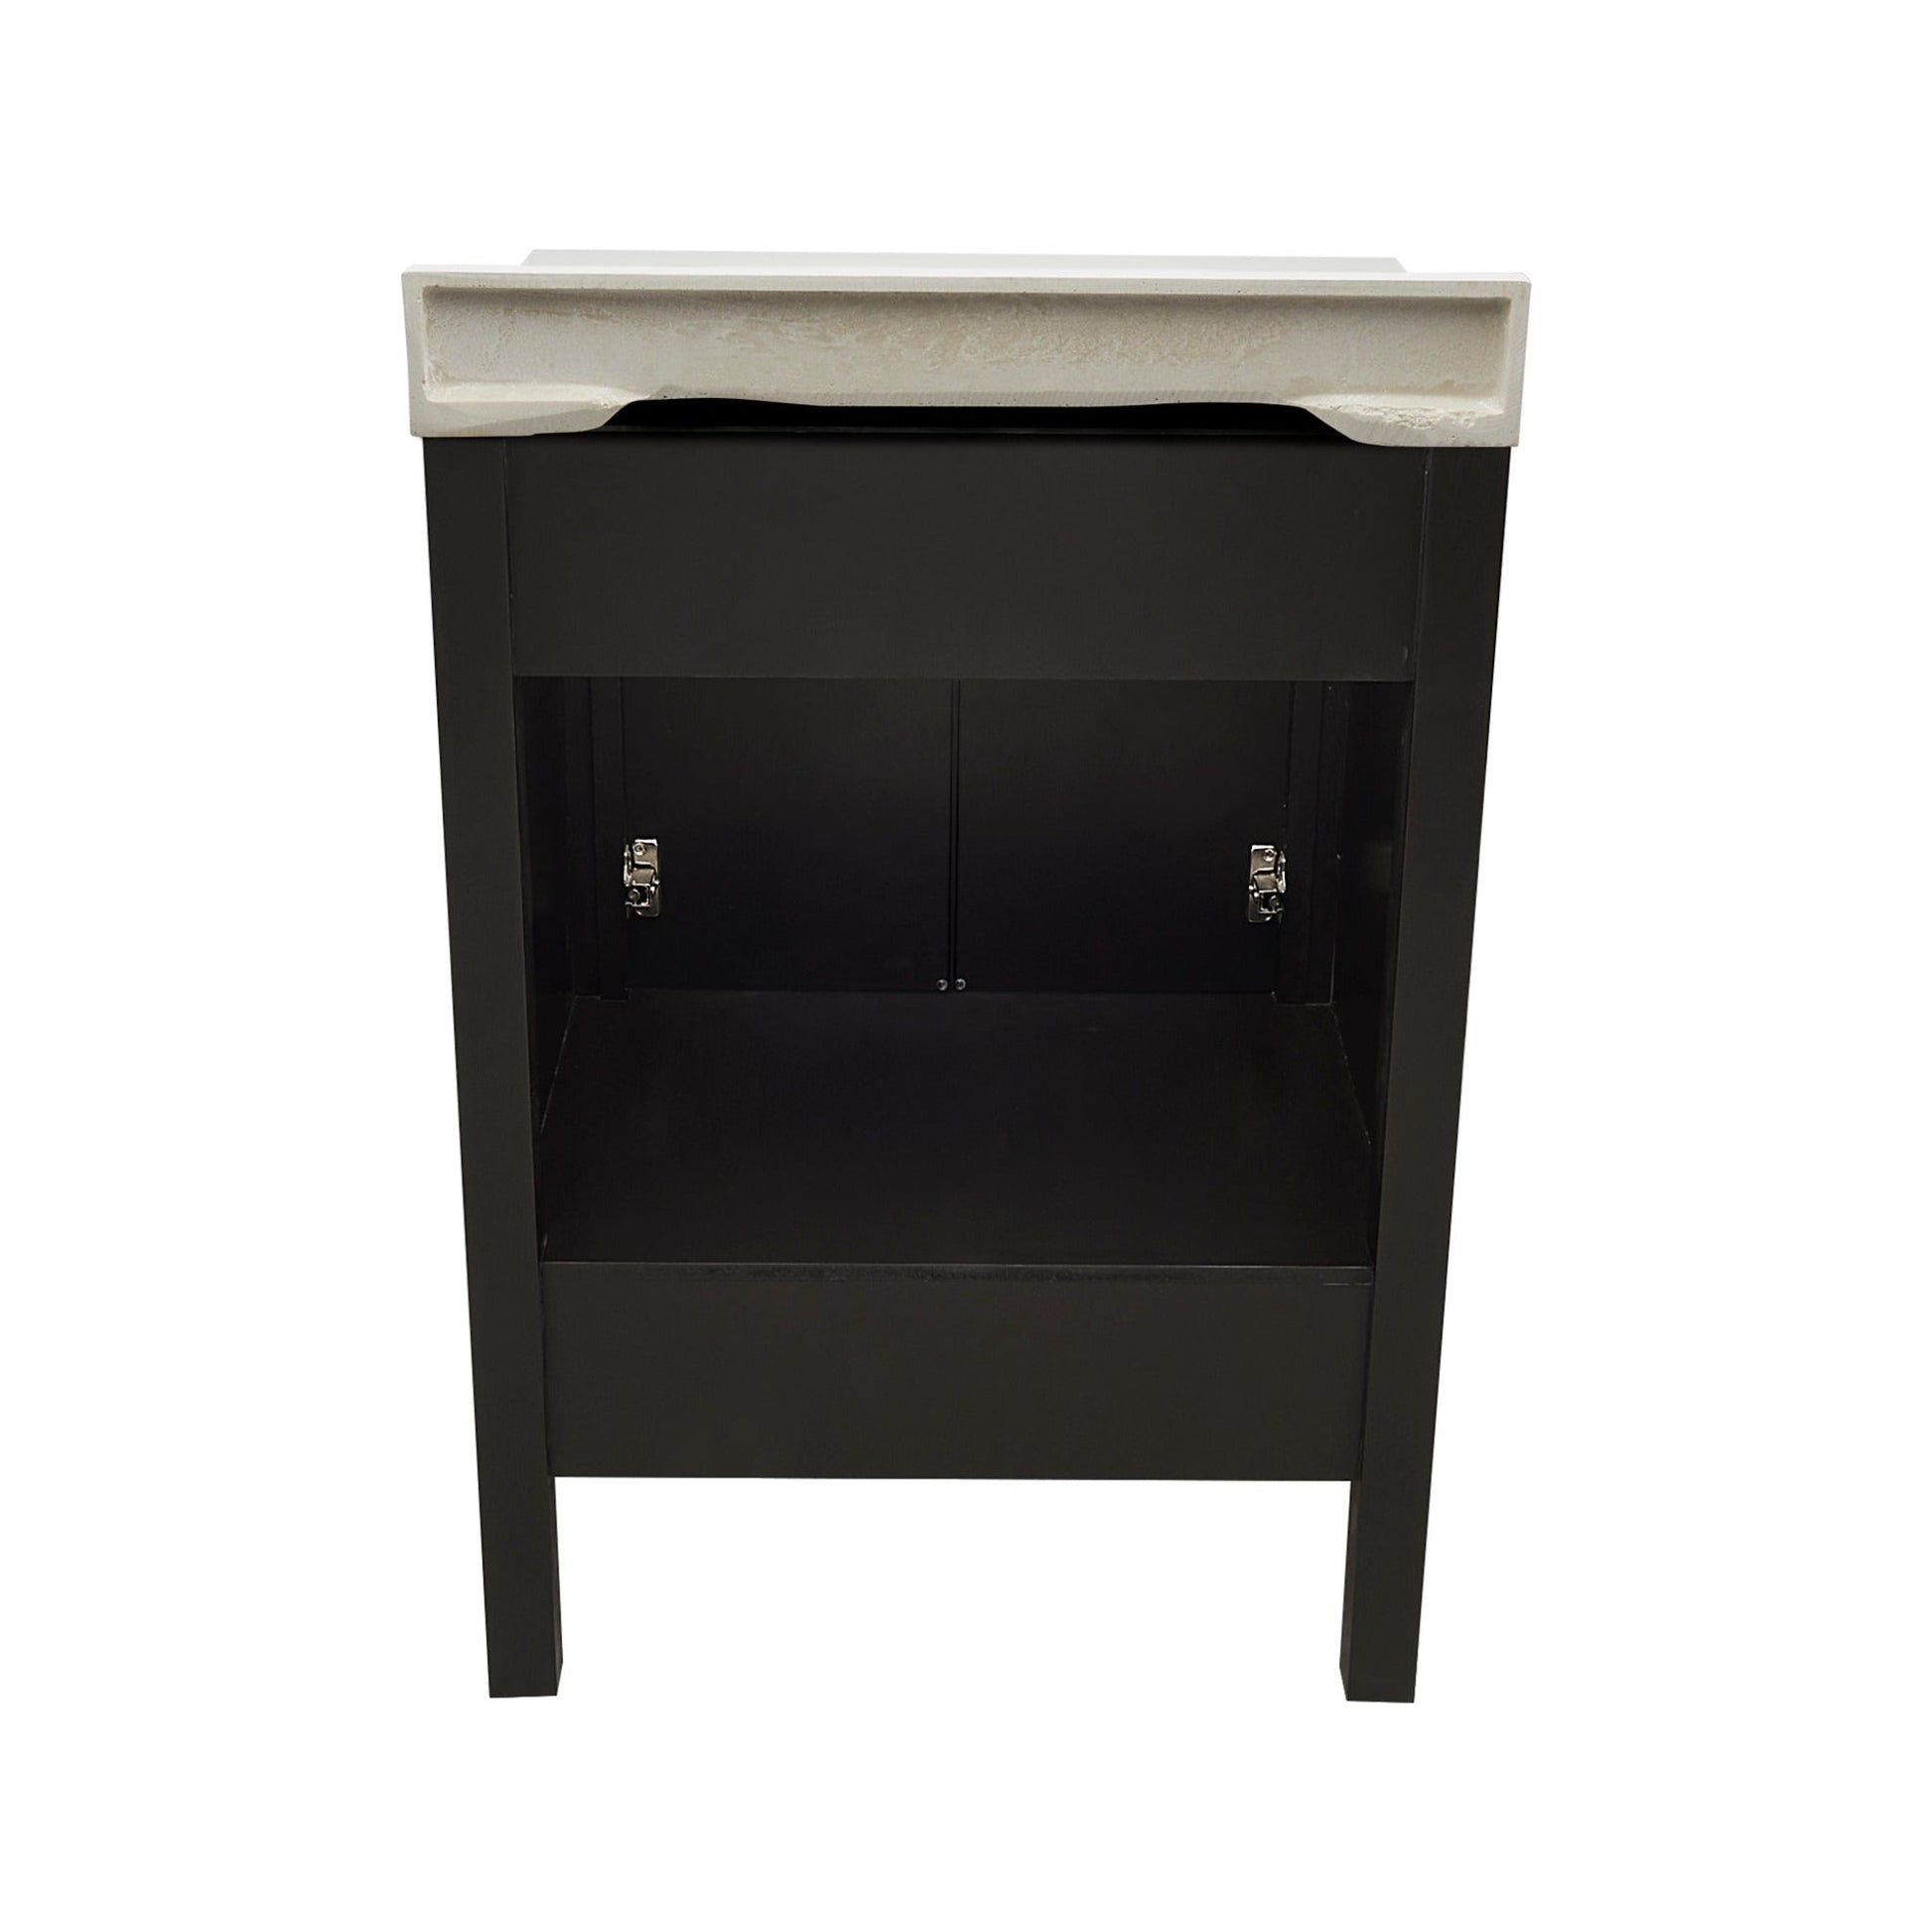 Ella’s Bubbles Nevado 25" Espresso Bathroom Vanity With White Cultured Marble Top With White Backsplash and Sink